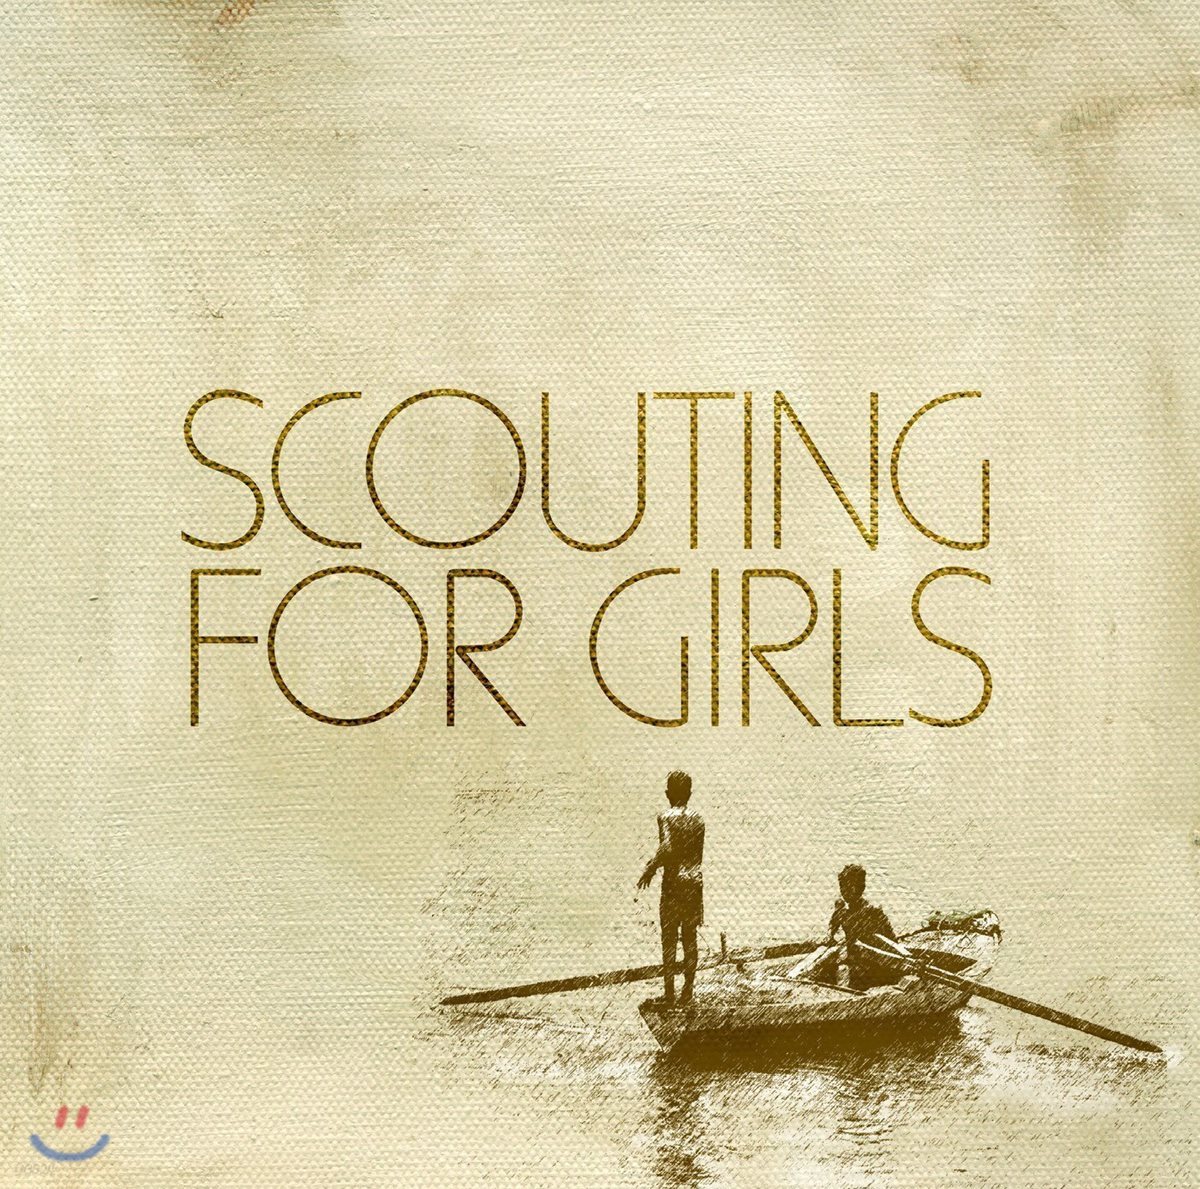 Scouting For Girls (스카우팅 포 걸즈) - Scouting For Girls [10th Anniversary LP] 